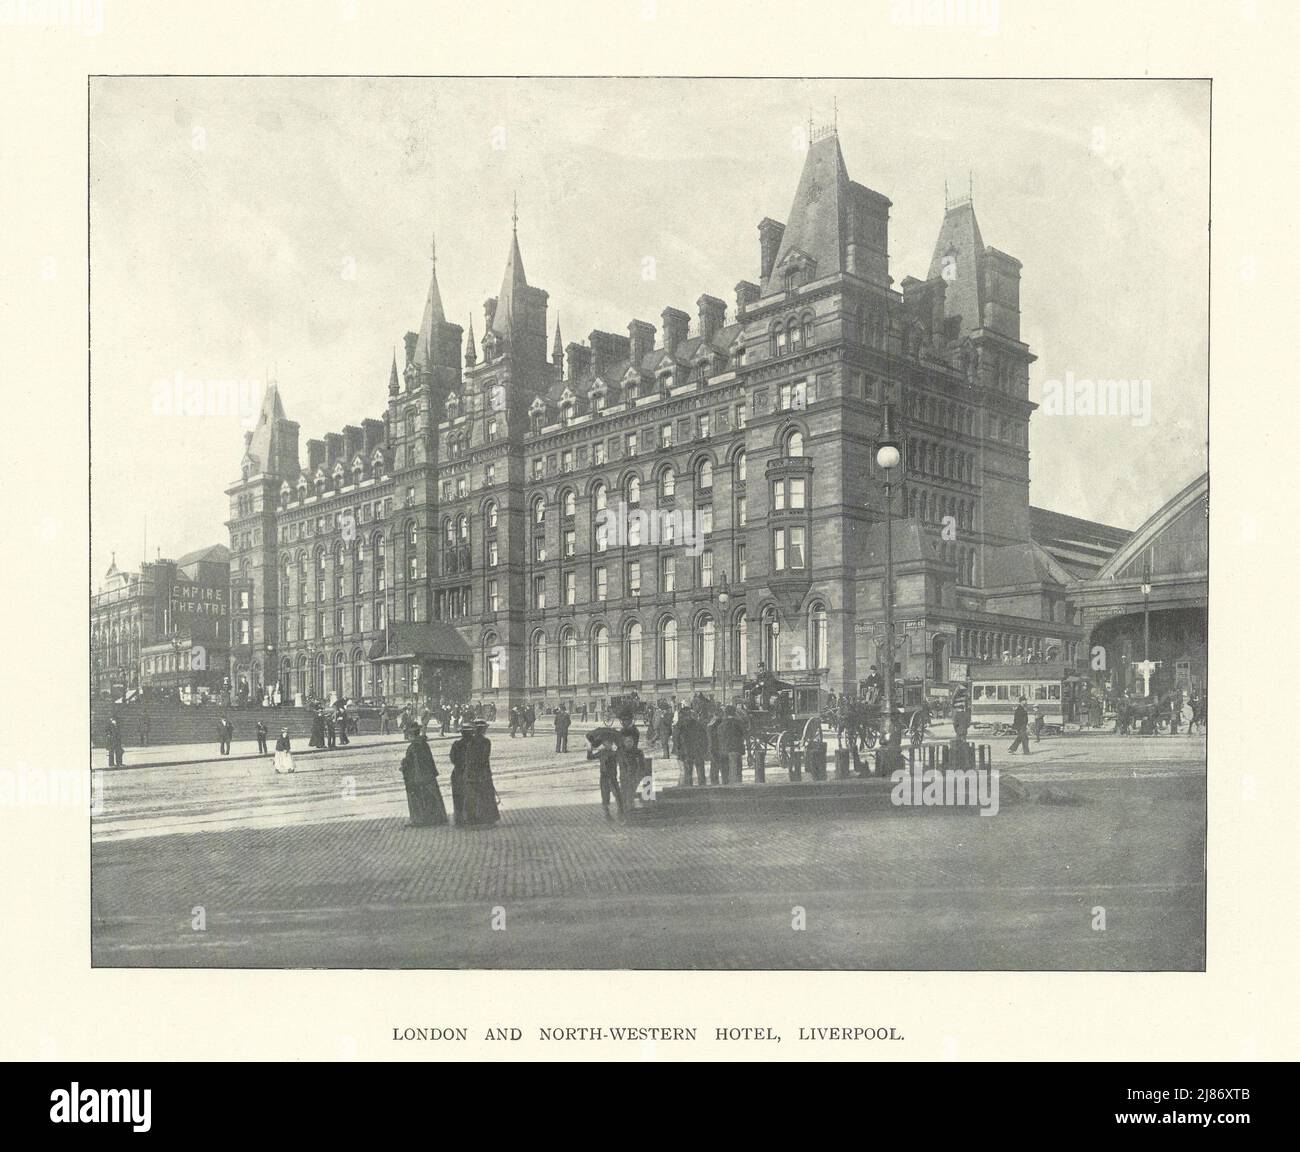 London and North-Western Hotel, Liverpool 1903 old antique print picture Stock Photo